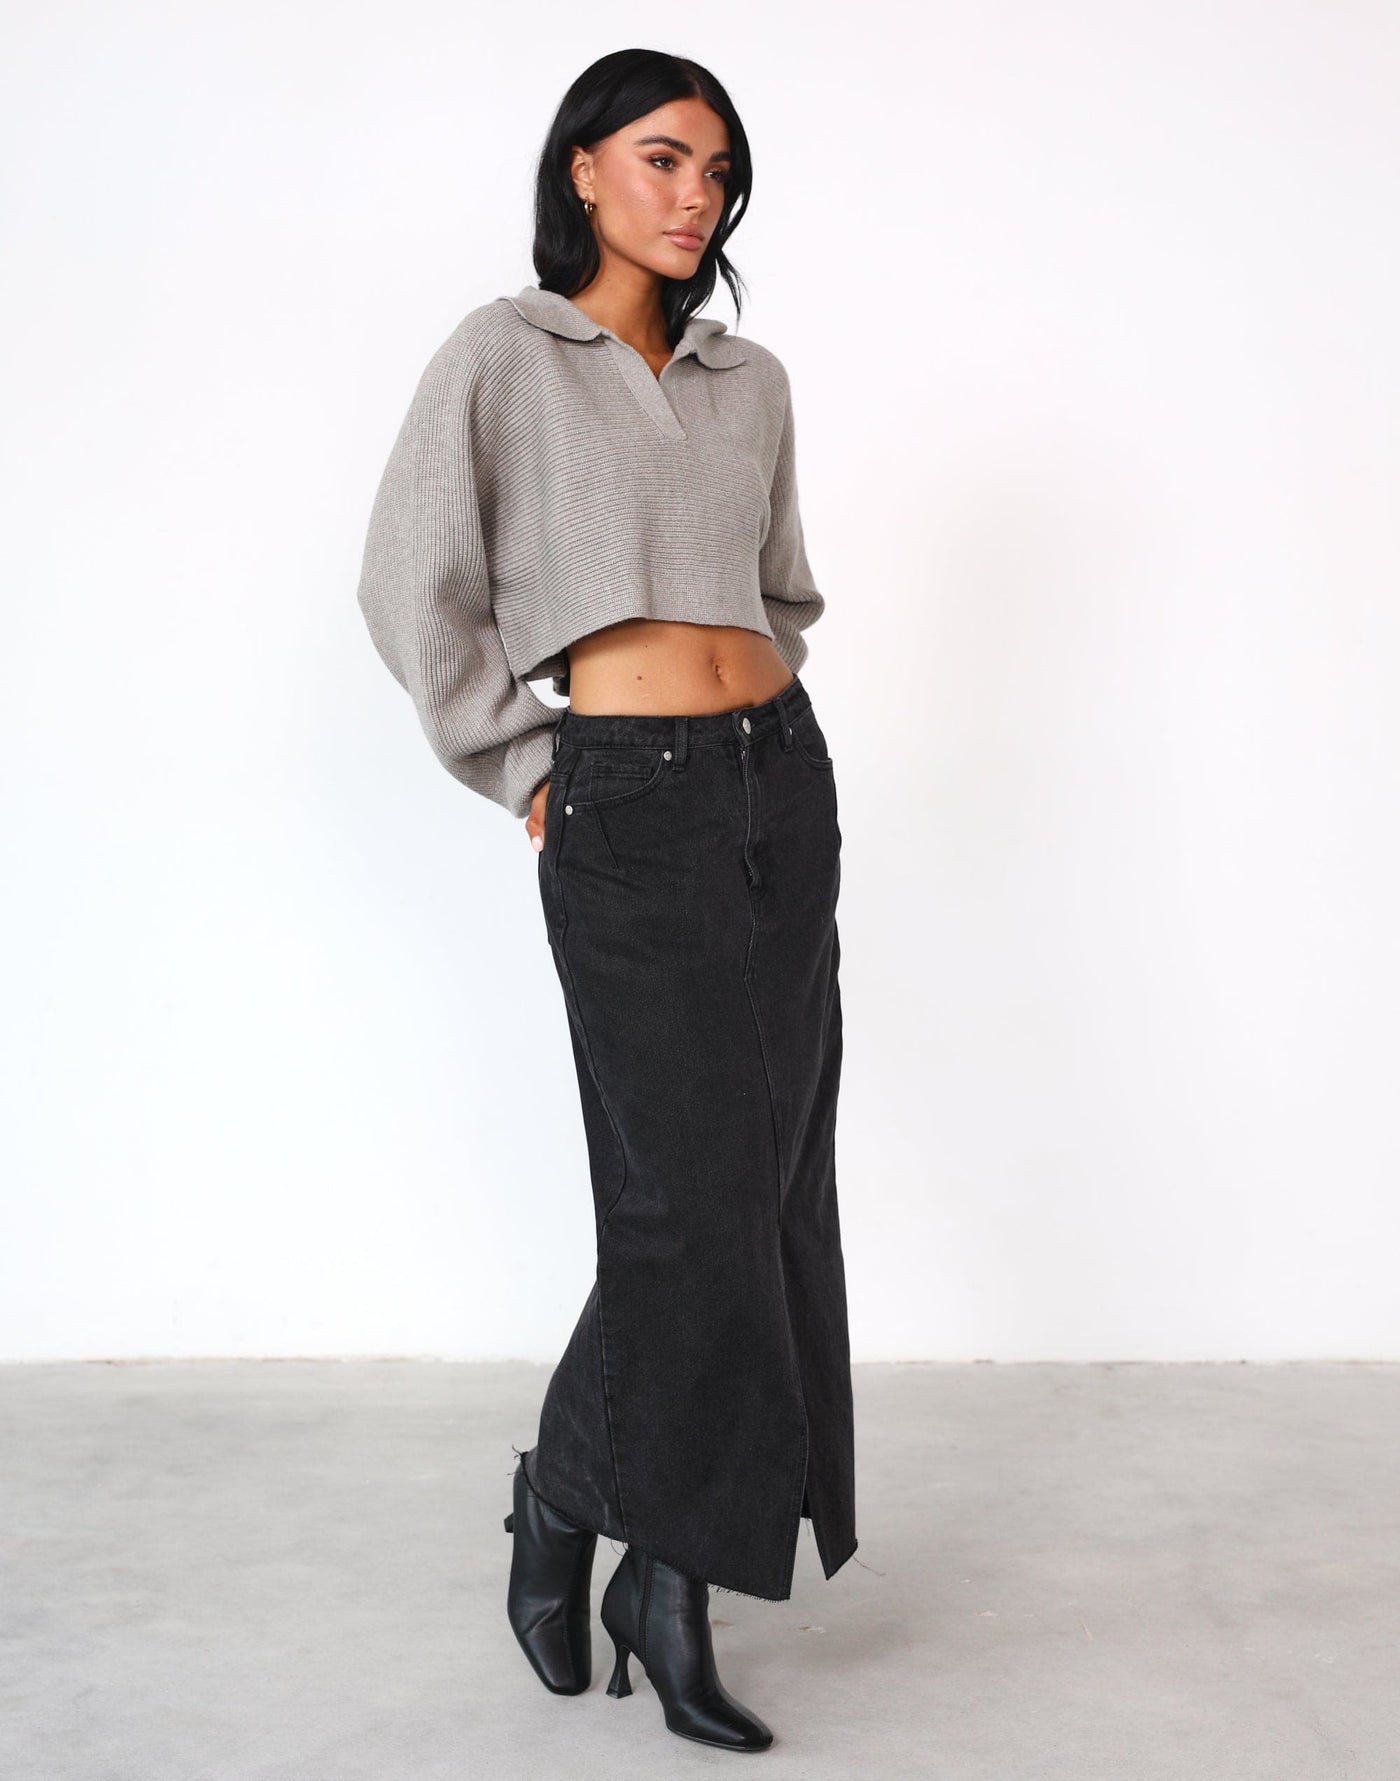 Logan Jumper (Grey) - Cropped Knit Jumper - Women's Top - Charcoal Clothing